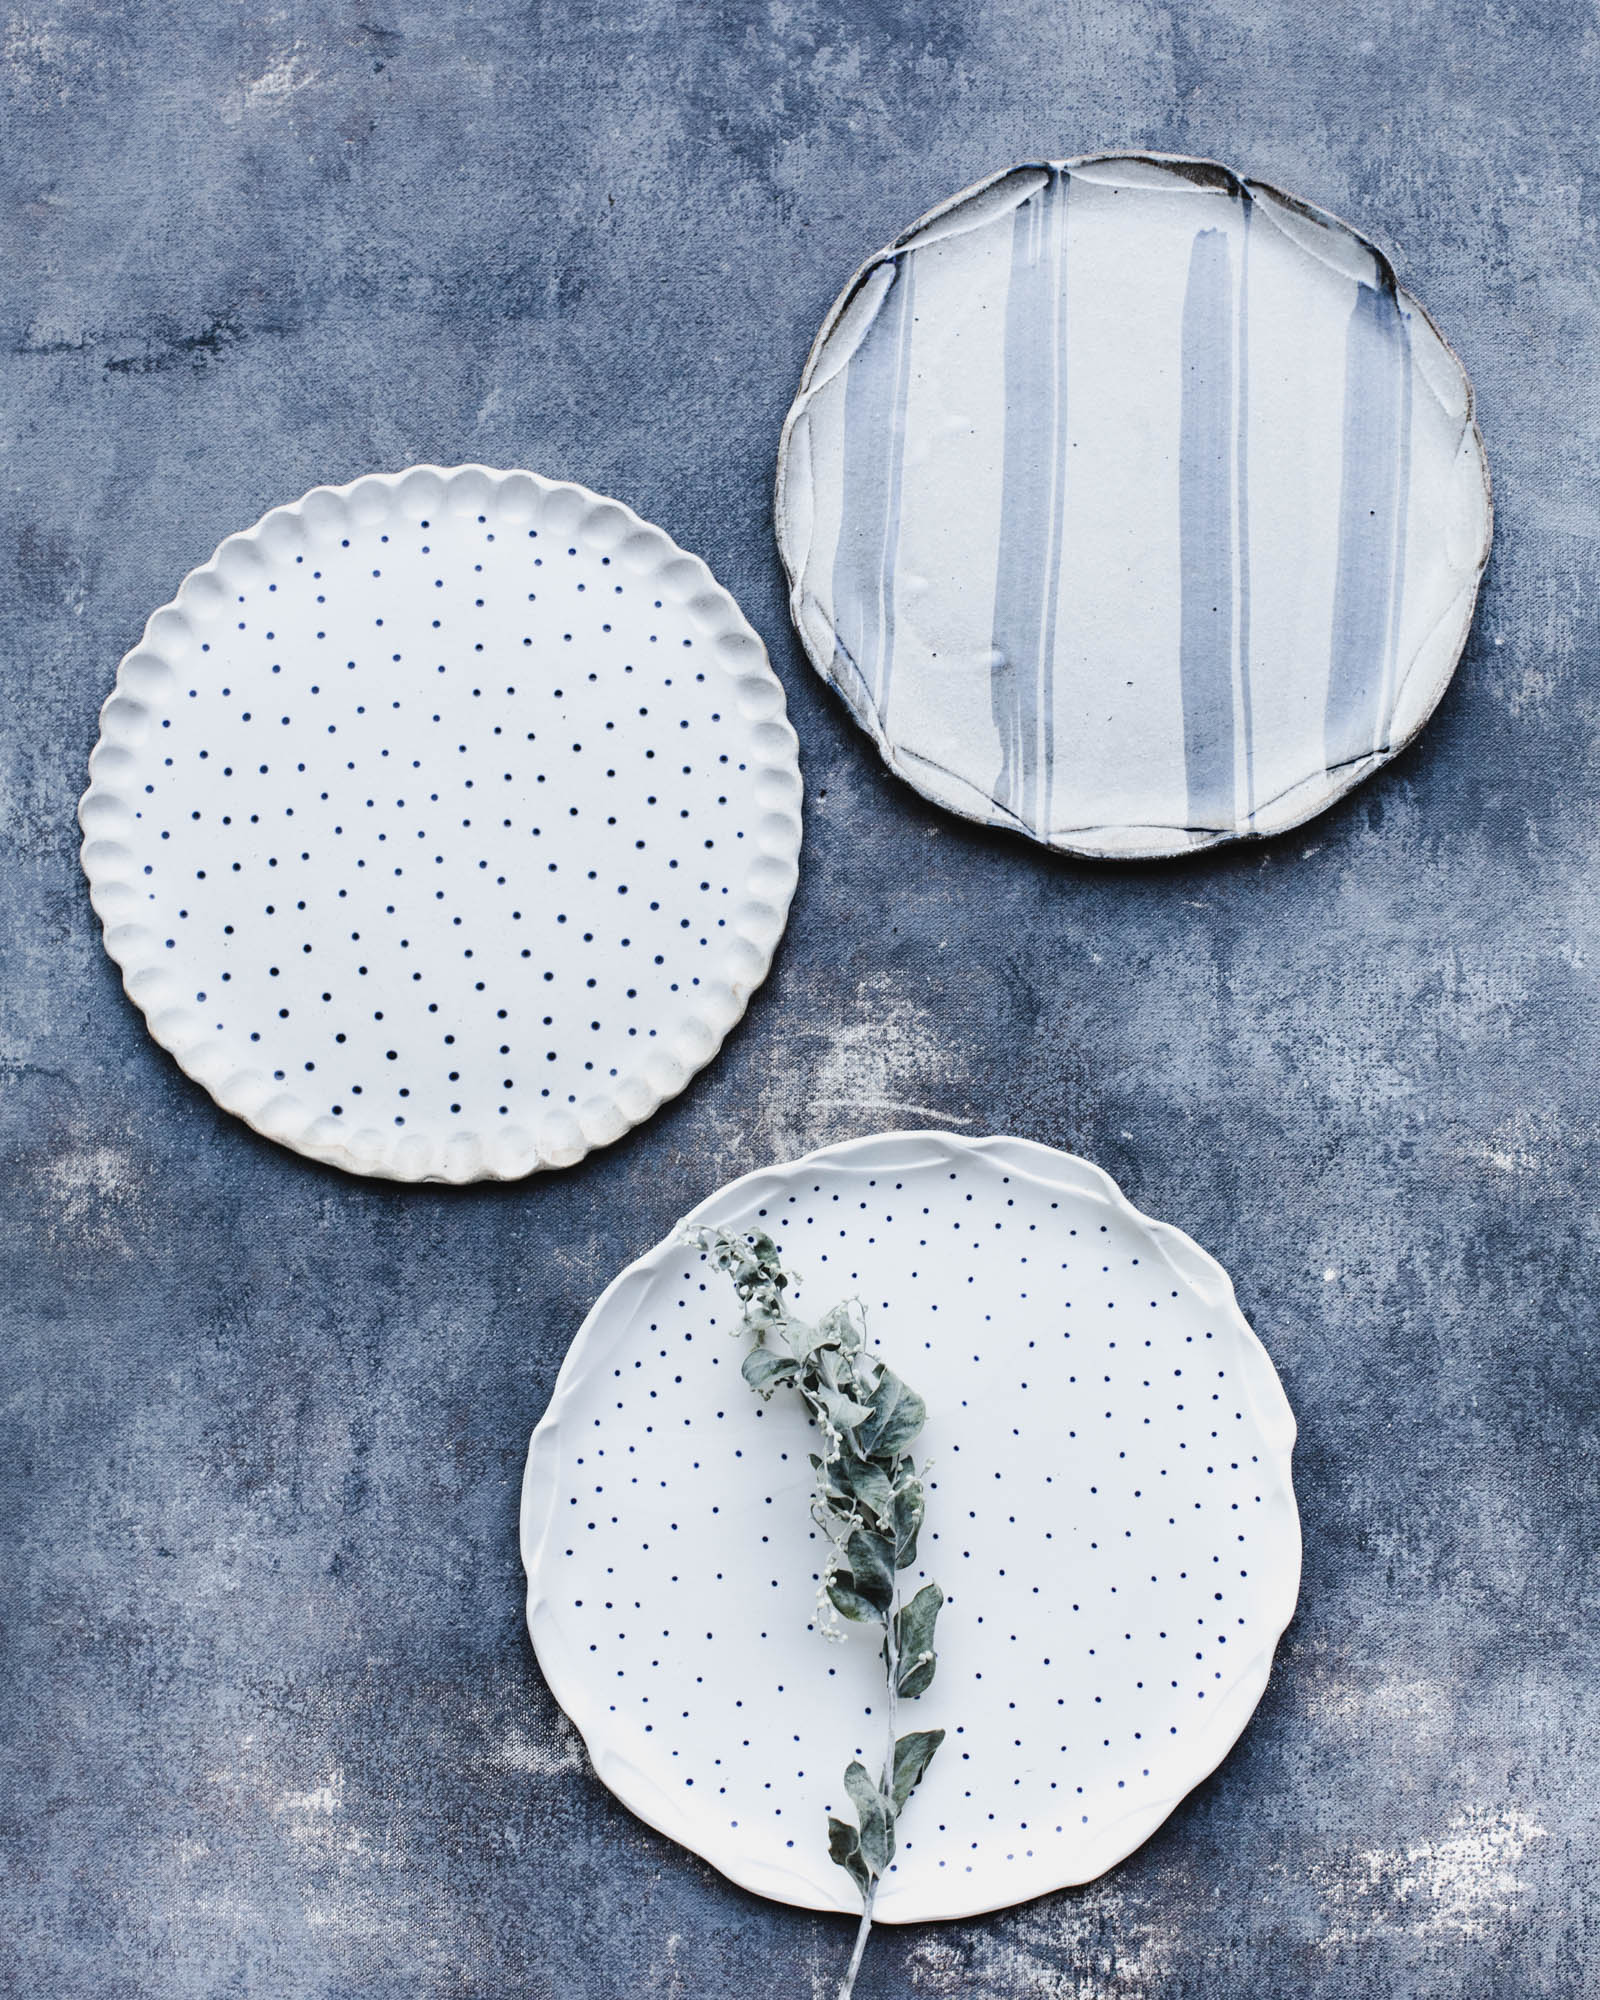 Earthy organic rimmed plates 20cm with blue lines and freckles